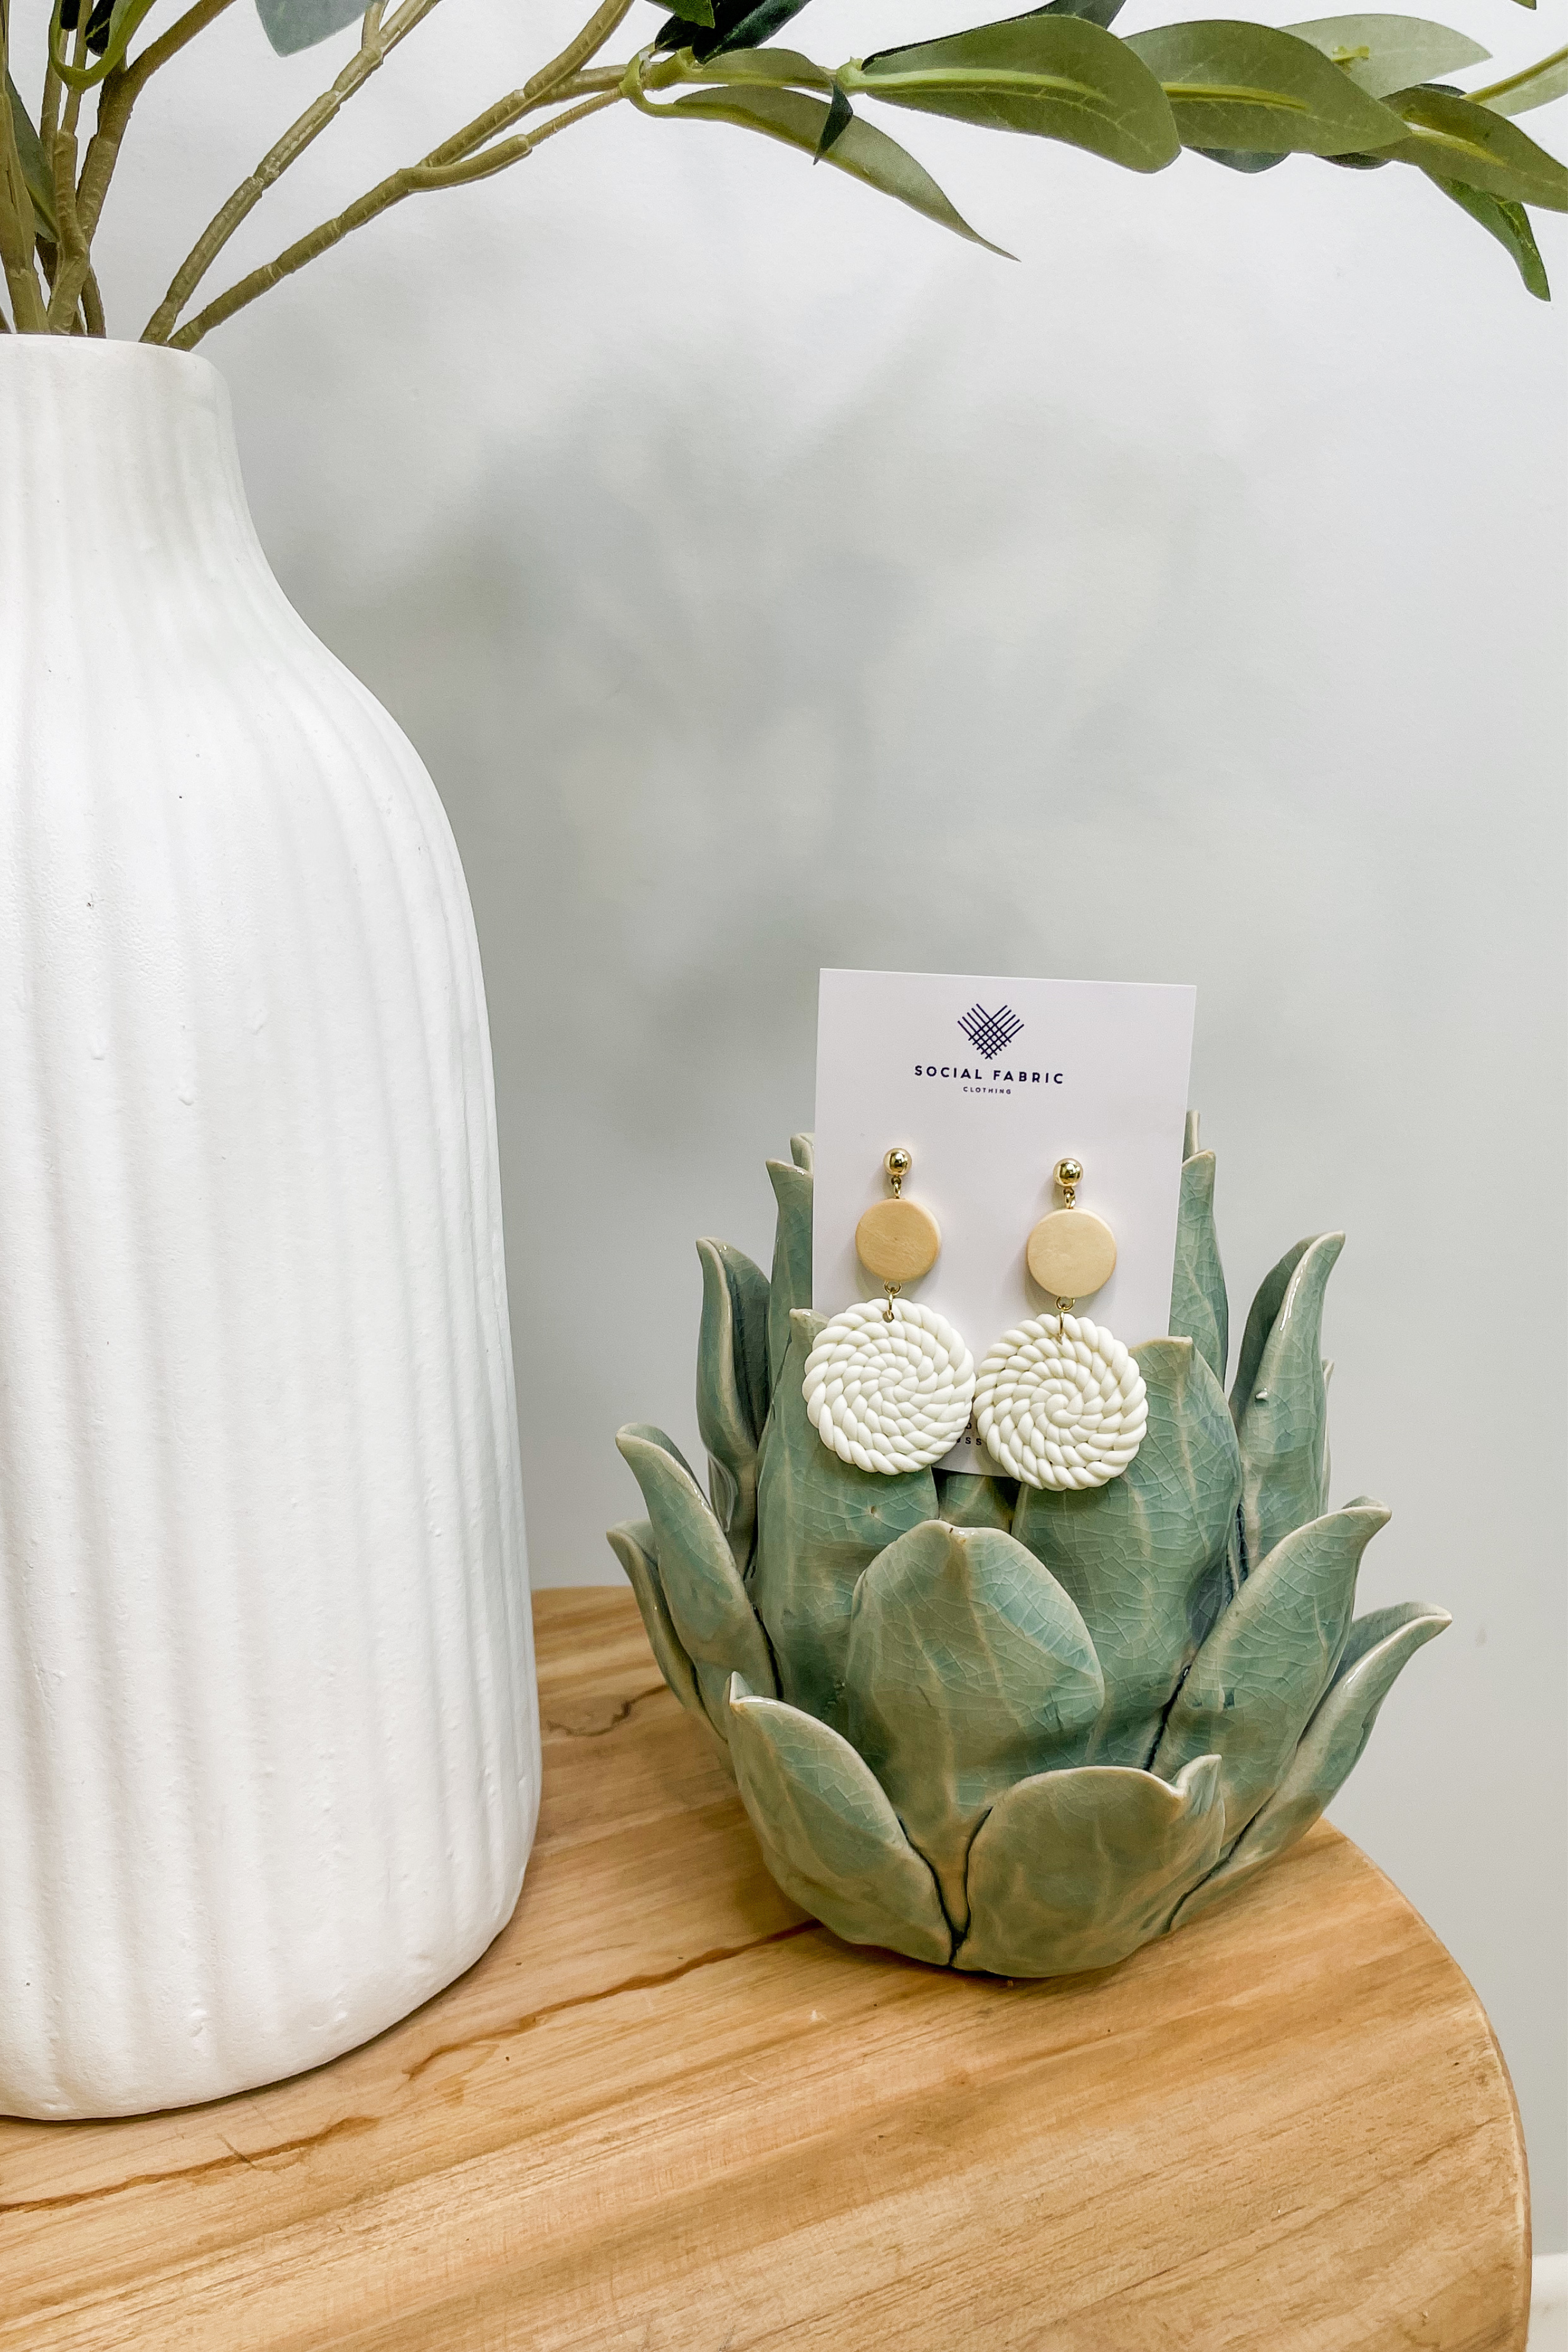 Nesso Earrings in Cream and Gold